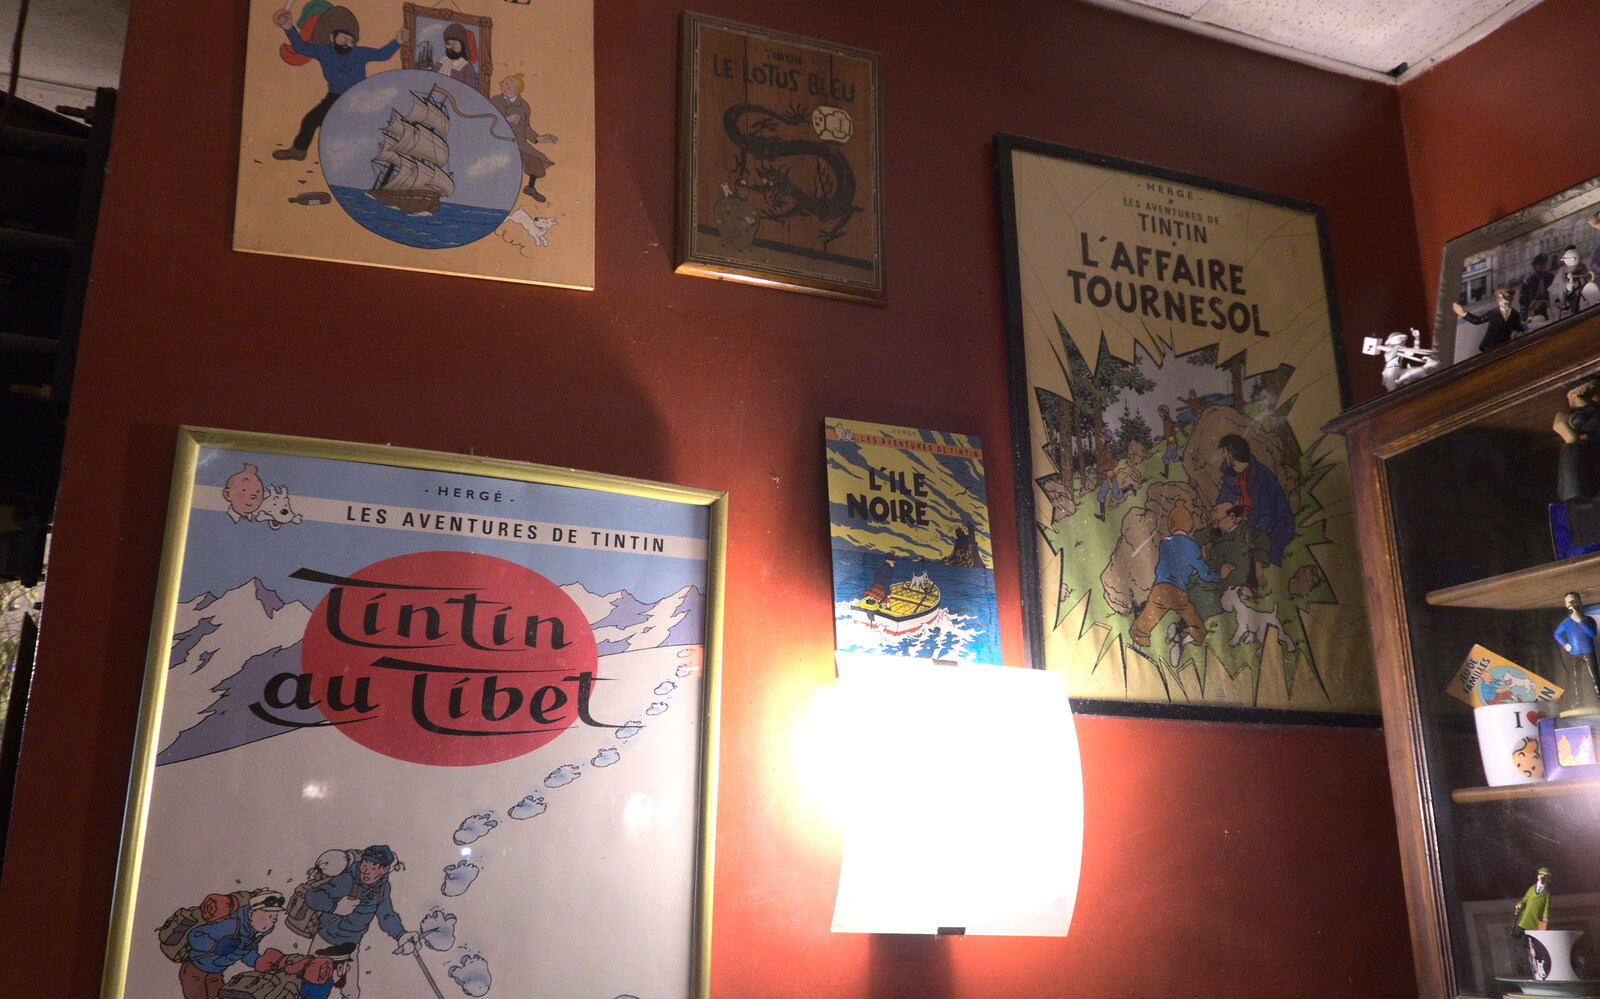 More posters, including Tintin from Le Gouffre Géant and Grotte de Limousis, Petanque and a Lightning Storm, Languedoc, France - 12th August 2018